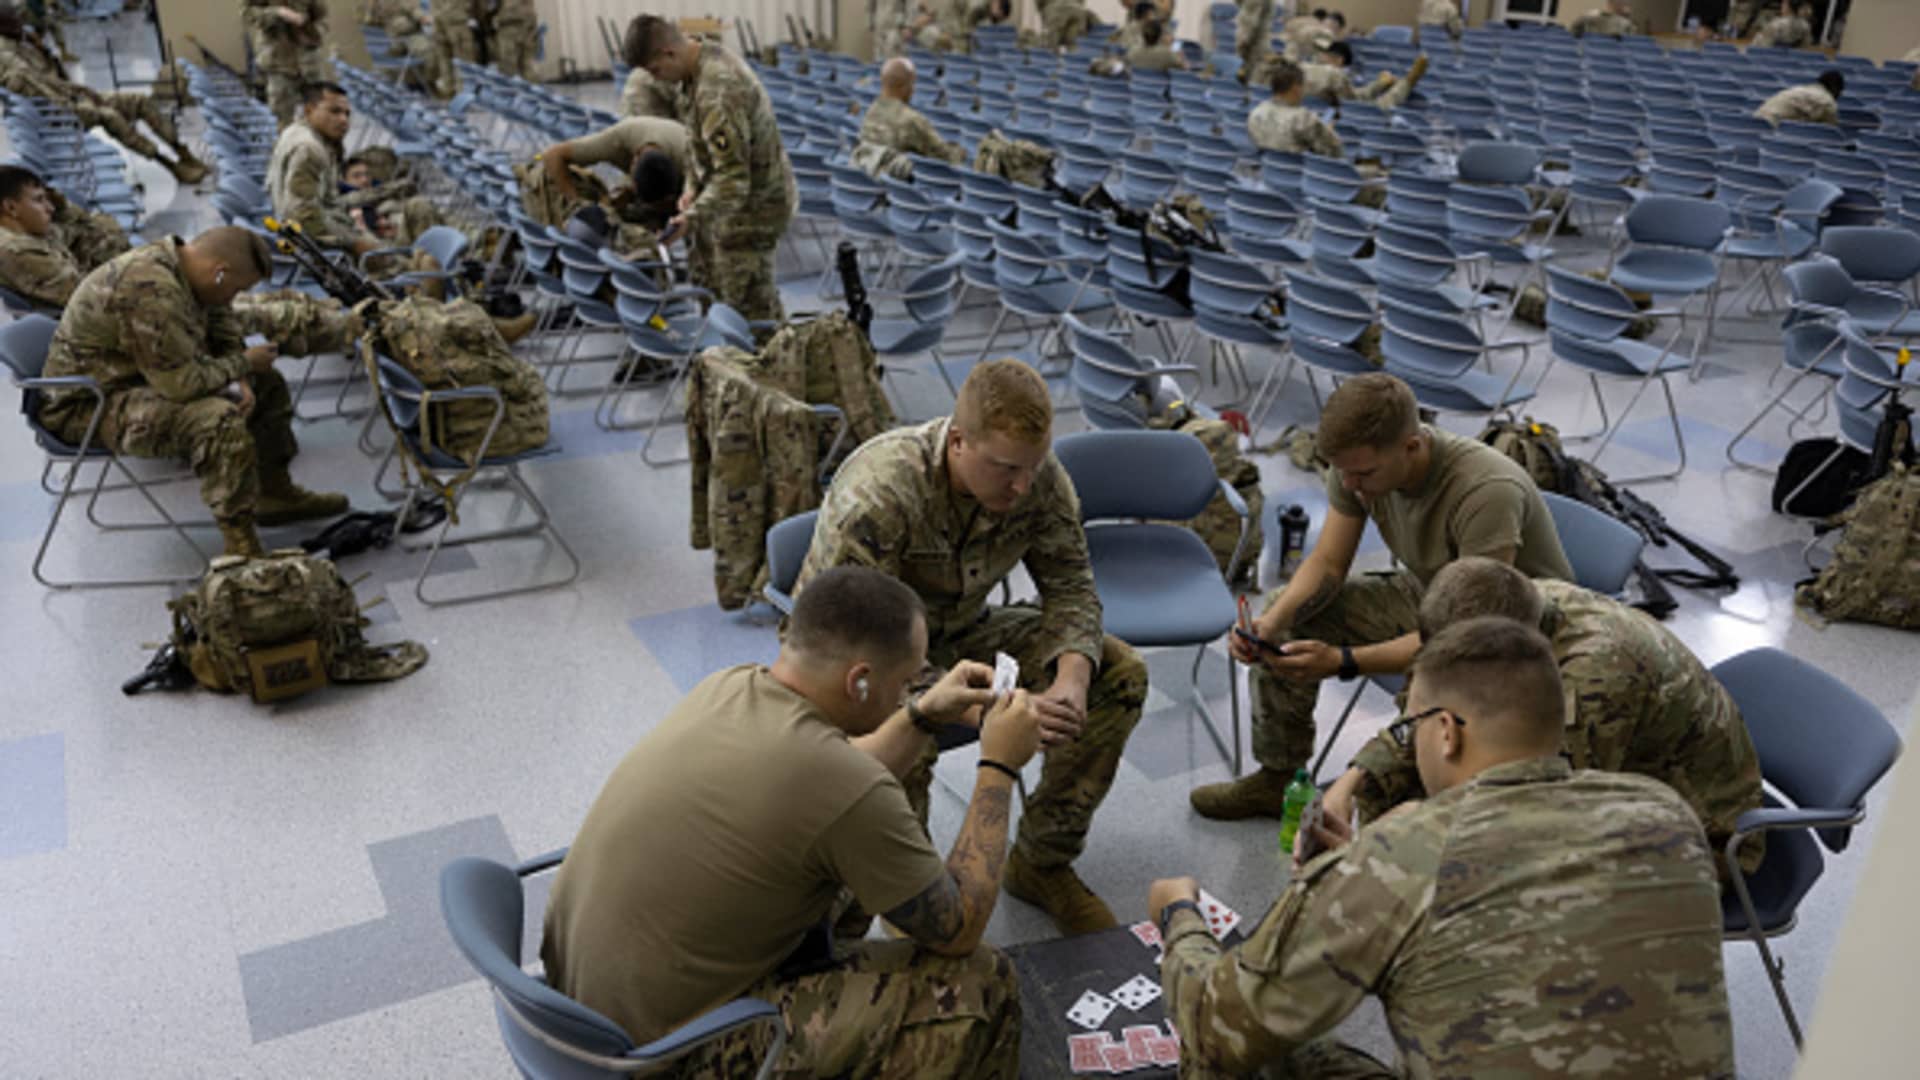 Members of the U.S. Army 2nd Brigade Combat Team await their flight to Europe for deployment on July 7, 2022 in Fort Campbell, Kentucky.